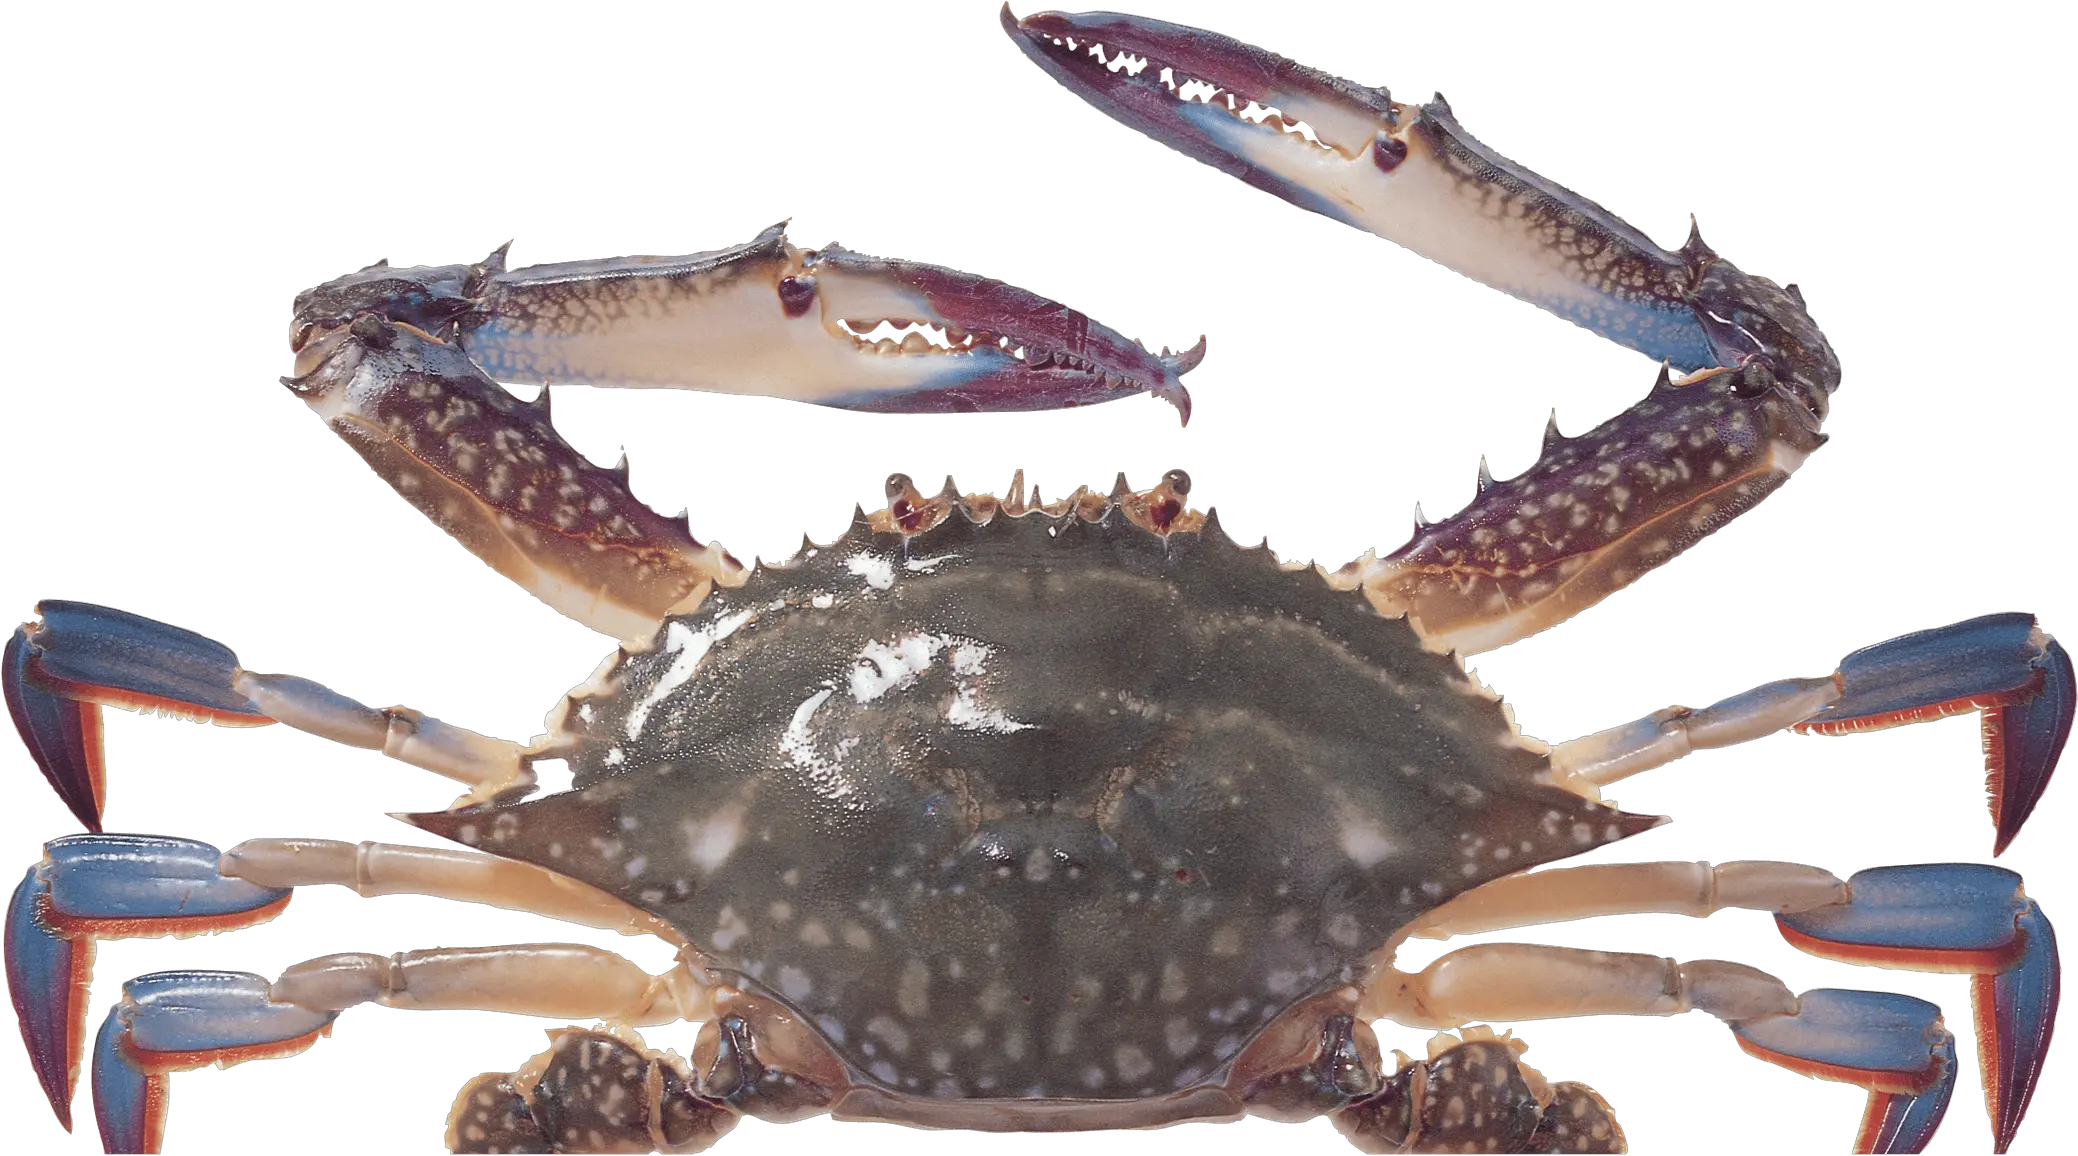 Free Transparent Png Images On Crab